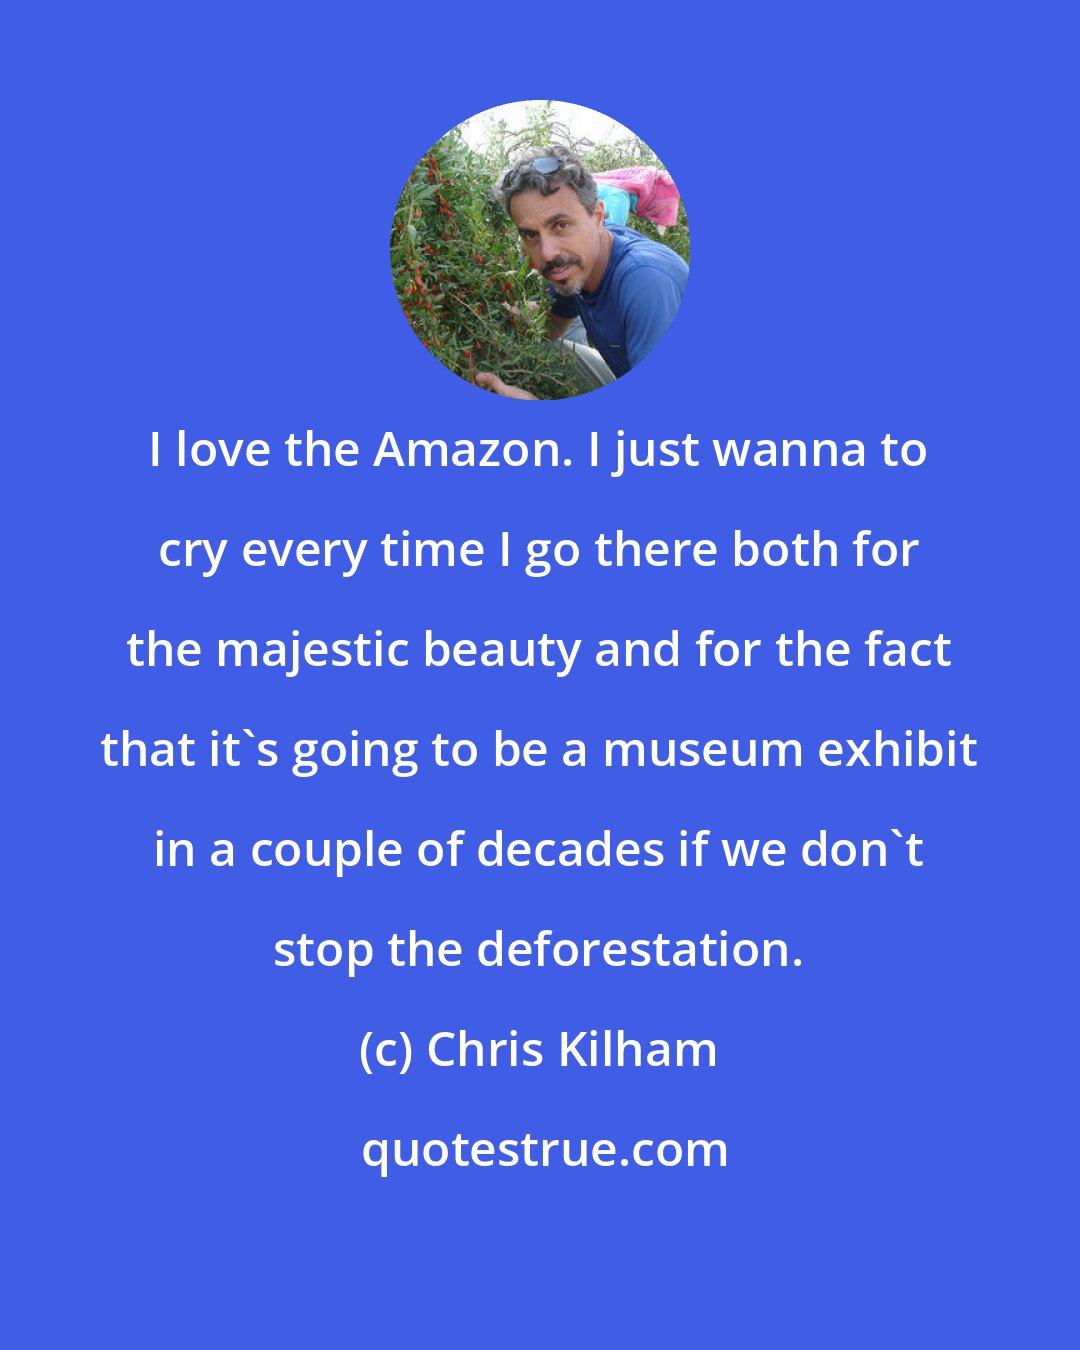 Chris Kilham: I love the Amazon. I just wanna to cry every time I go there both for the majestic beauty and for the fact that it's going to be a museum exhibit in a couple of decades if we don't stop the deforestation.